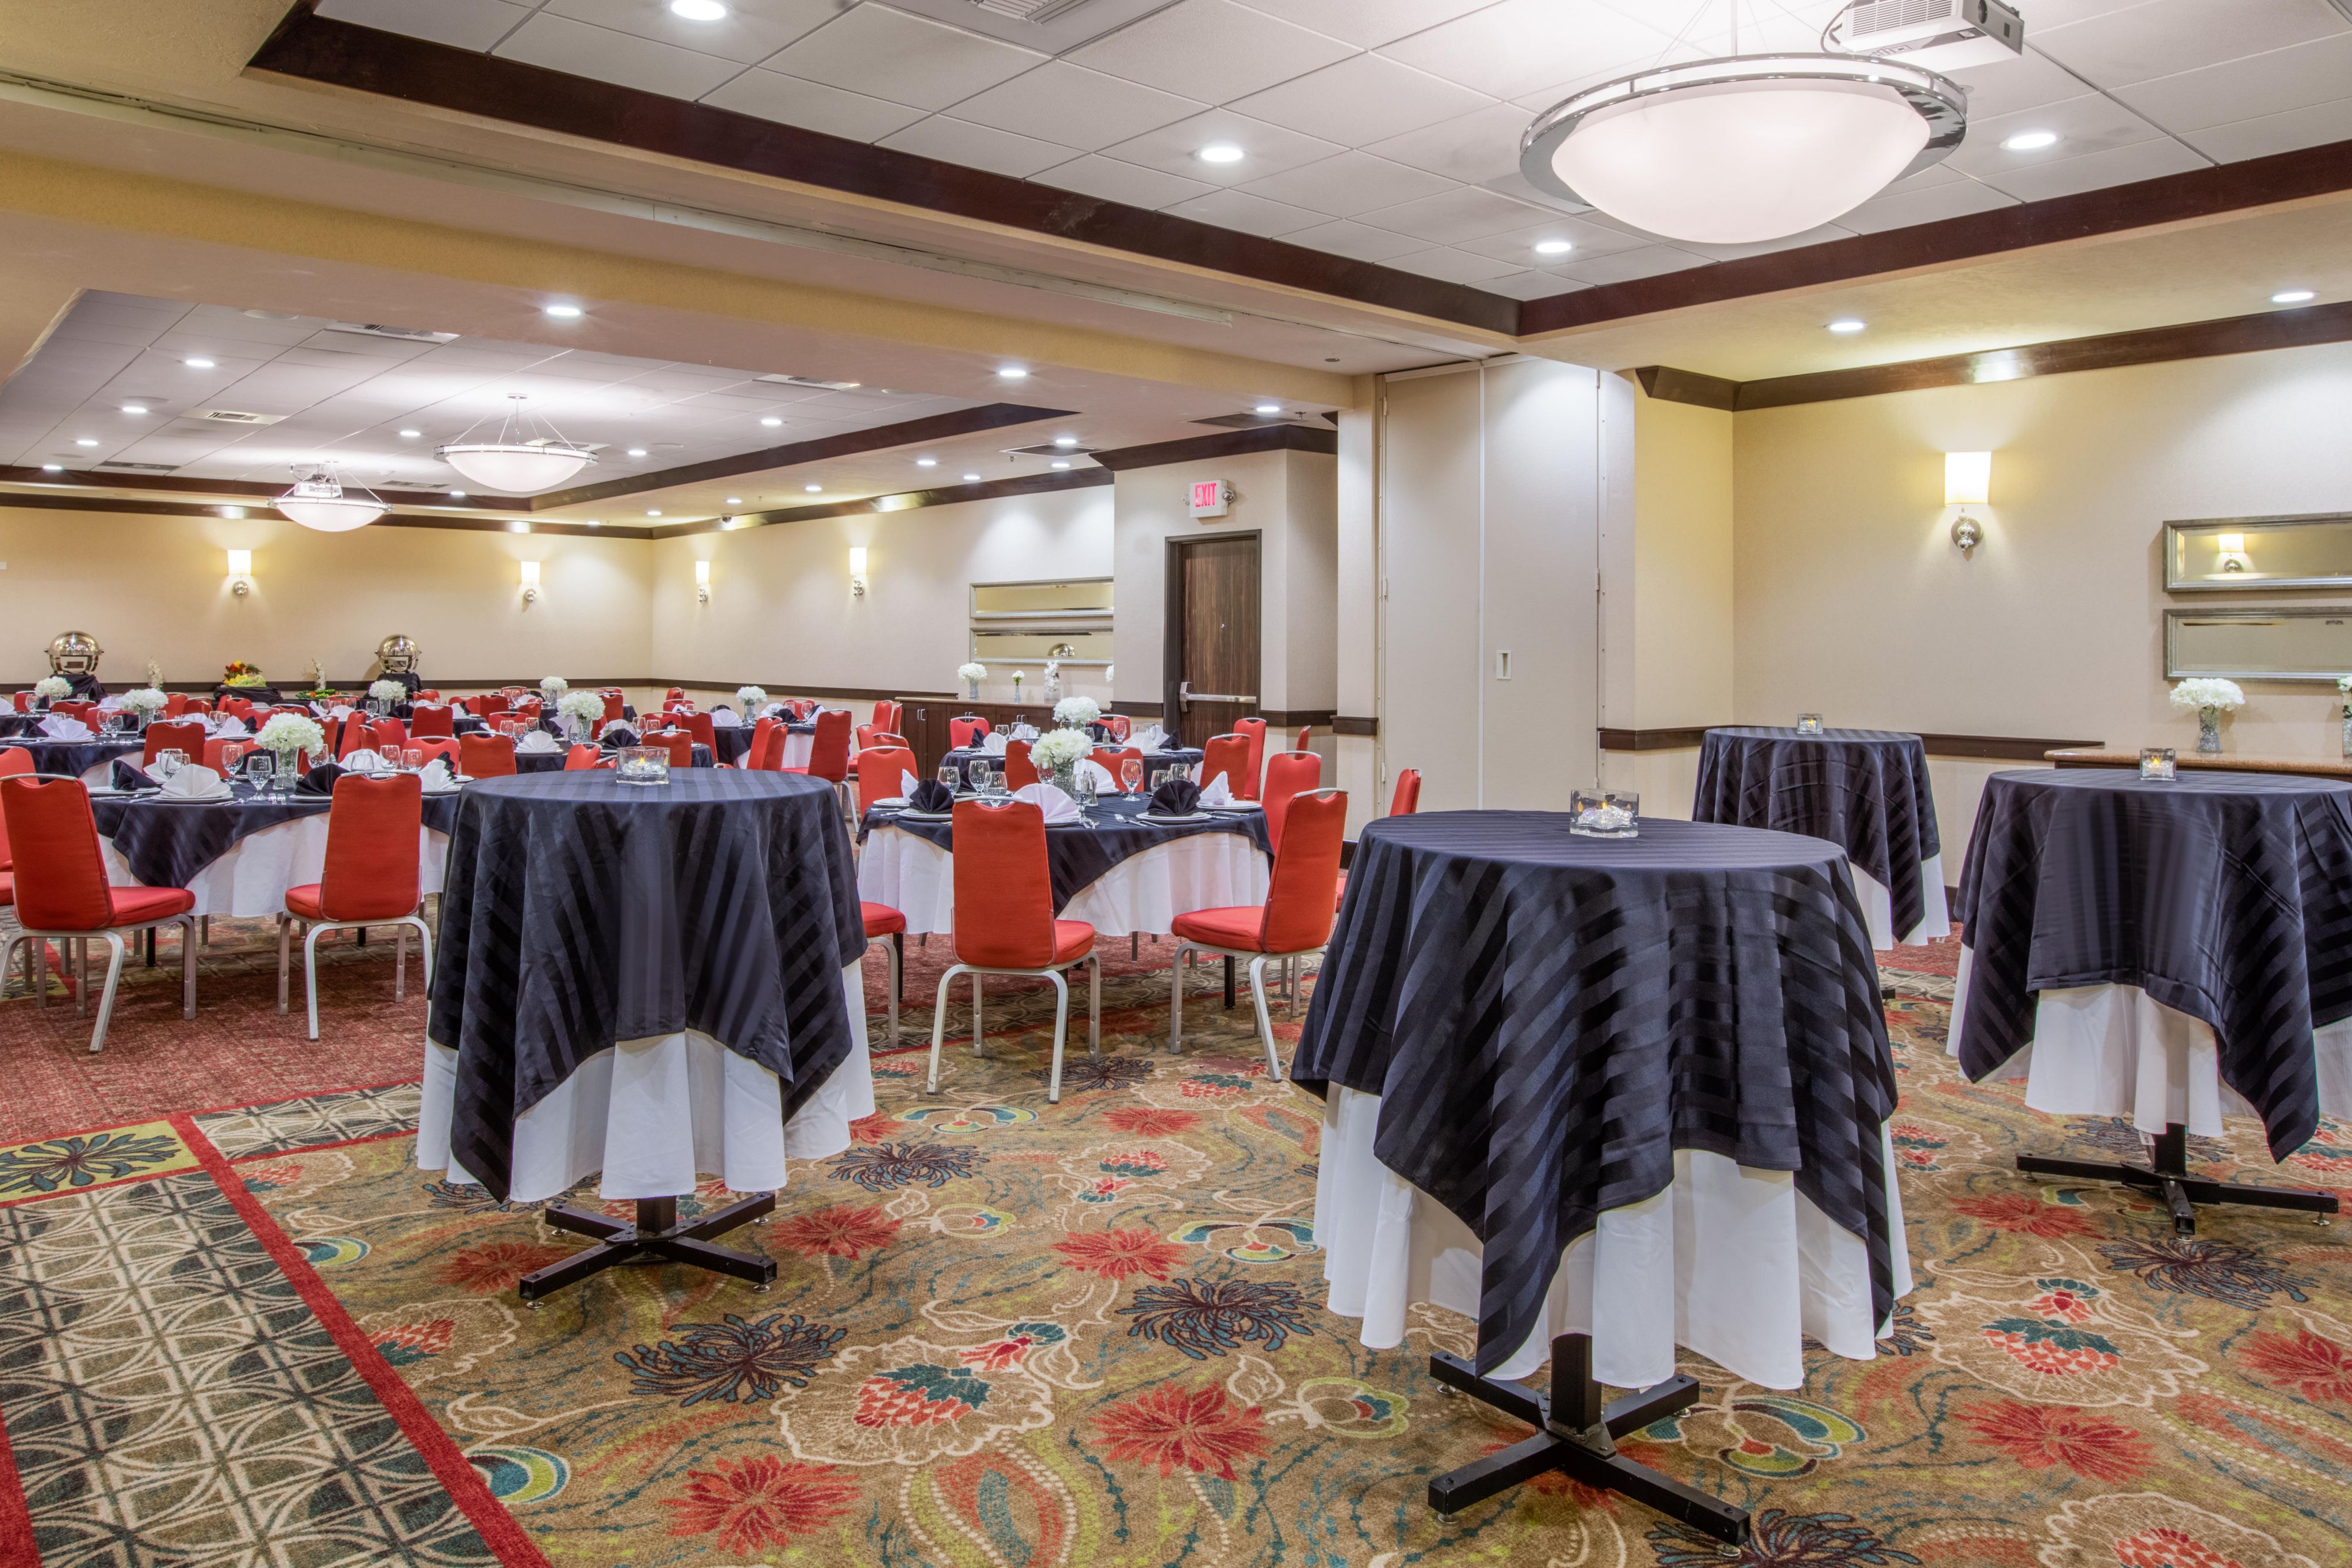 Our ballroom space is customizable to suit your event needs